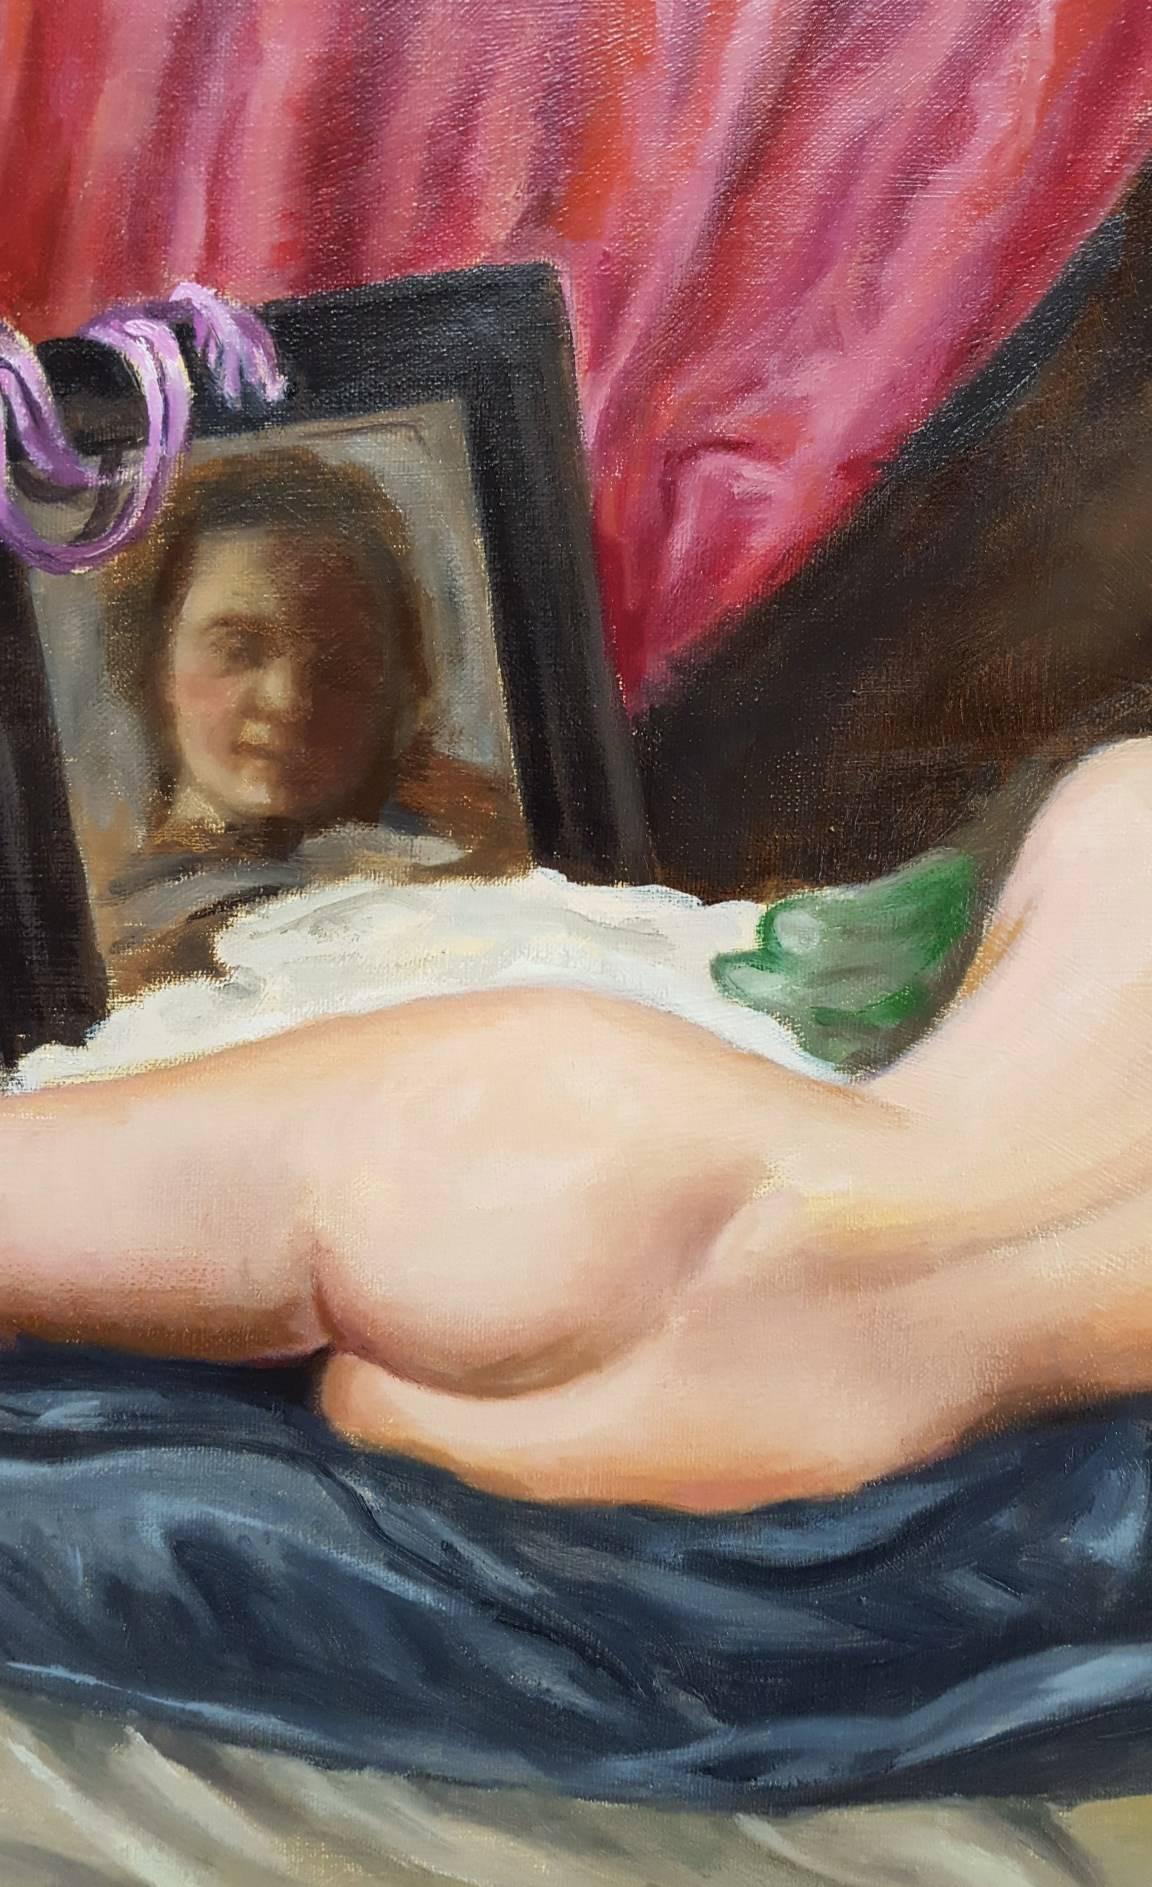 An original oil on linen canvas by English artist Christopher Stone (1933-) titled "The Toilet of Venus", 2016. Signed and dated lower right. Canvas size: 24" x 36". Mint condition.

The painting being admired is a reproduction